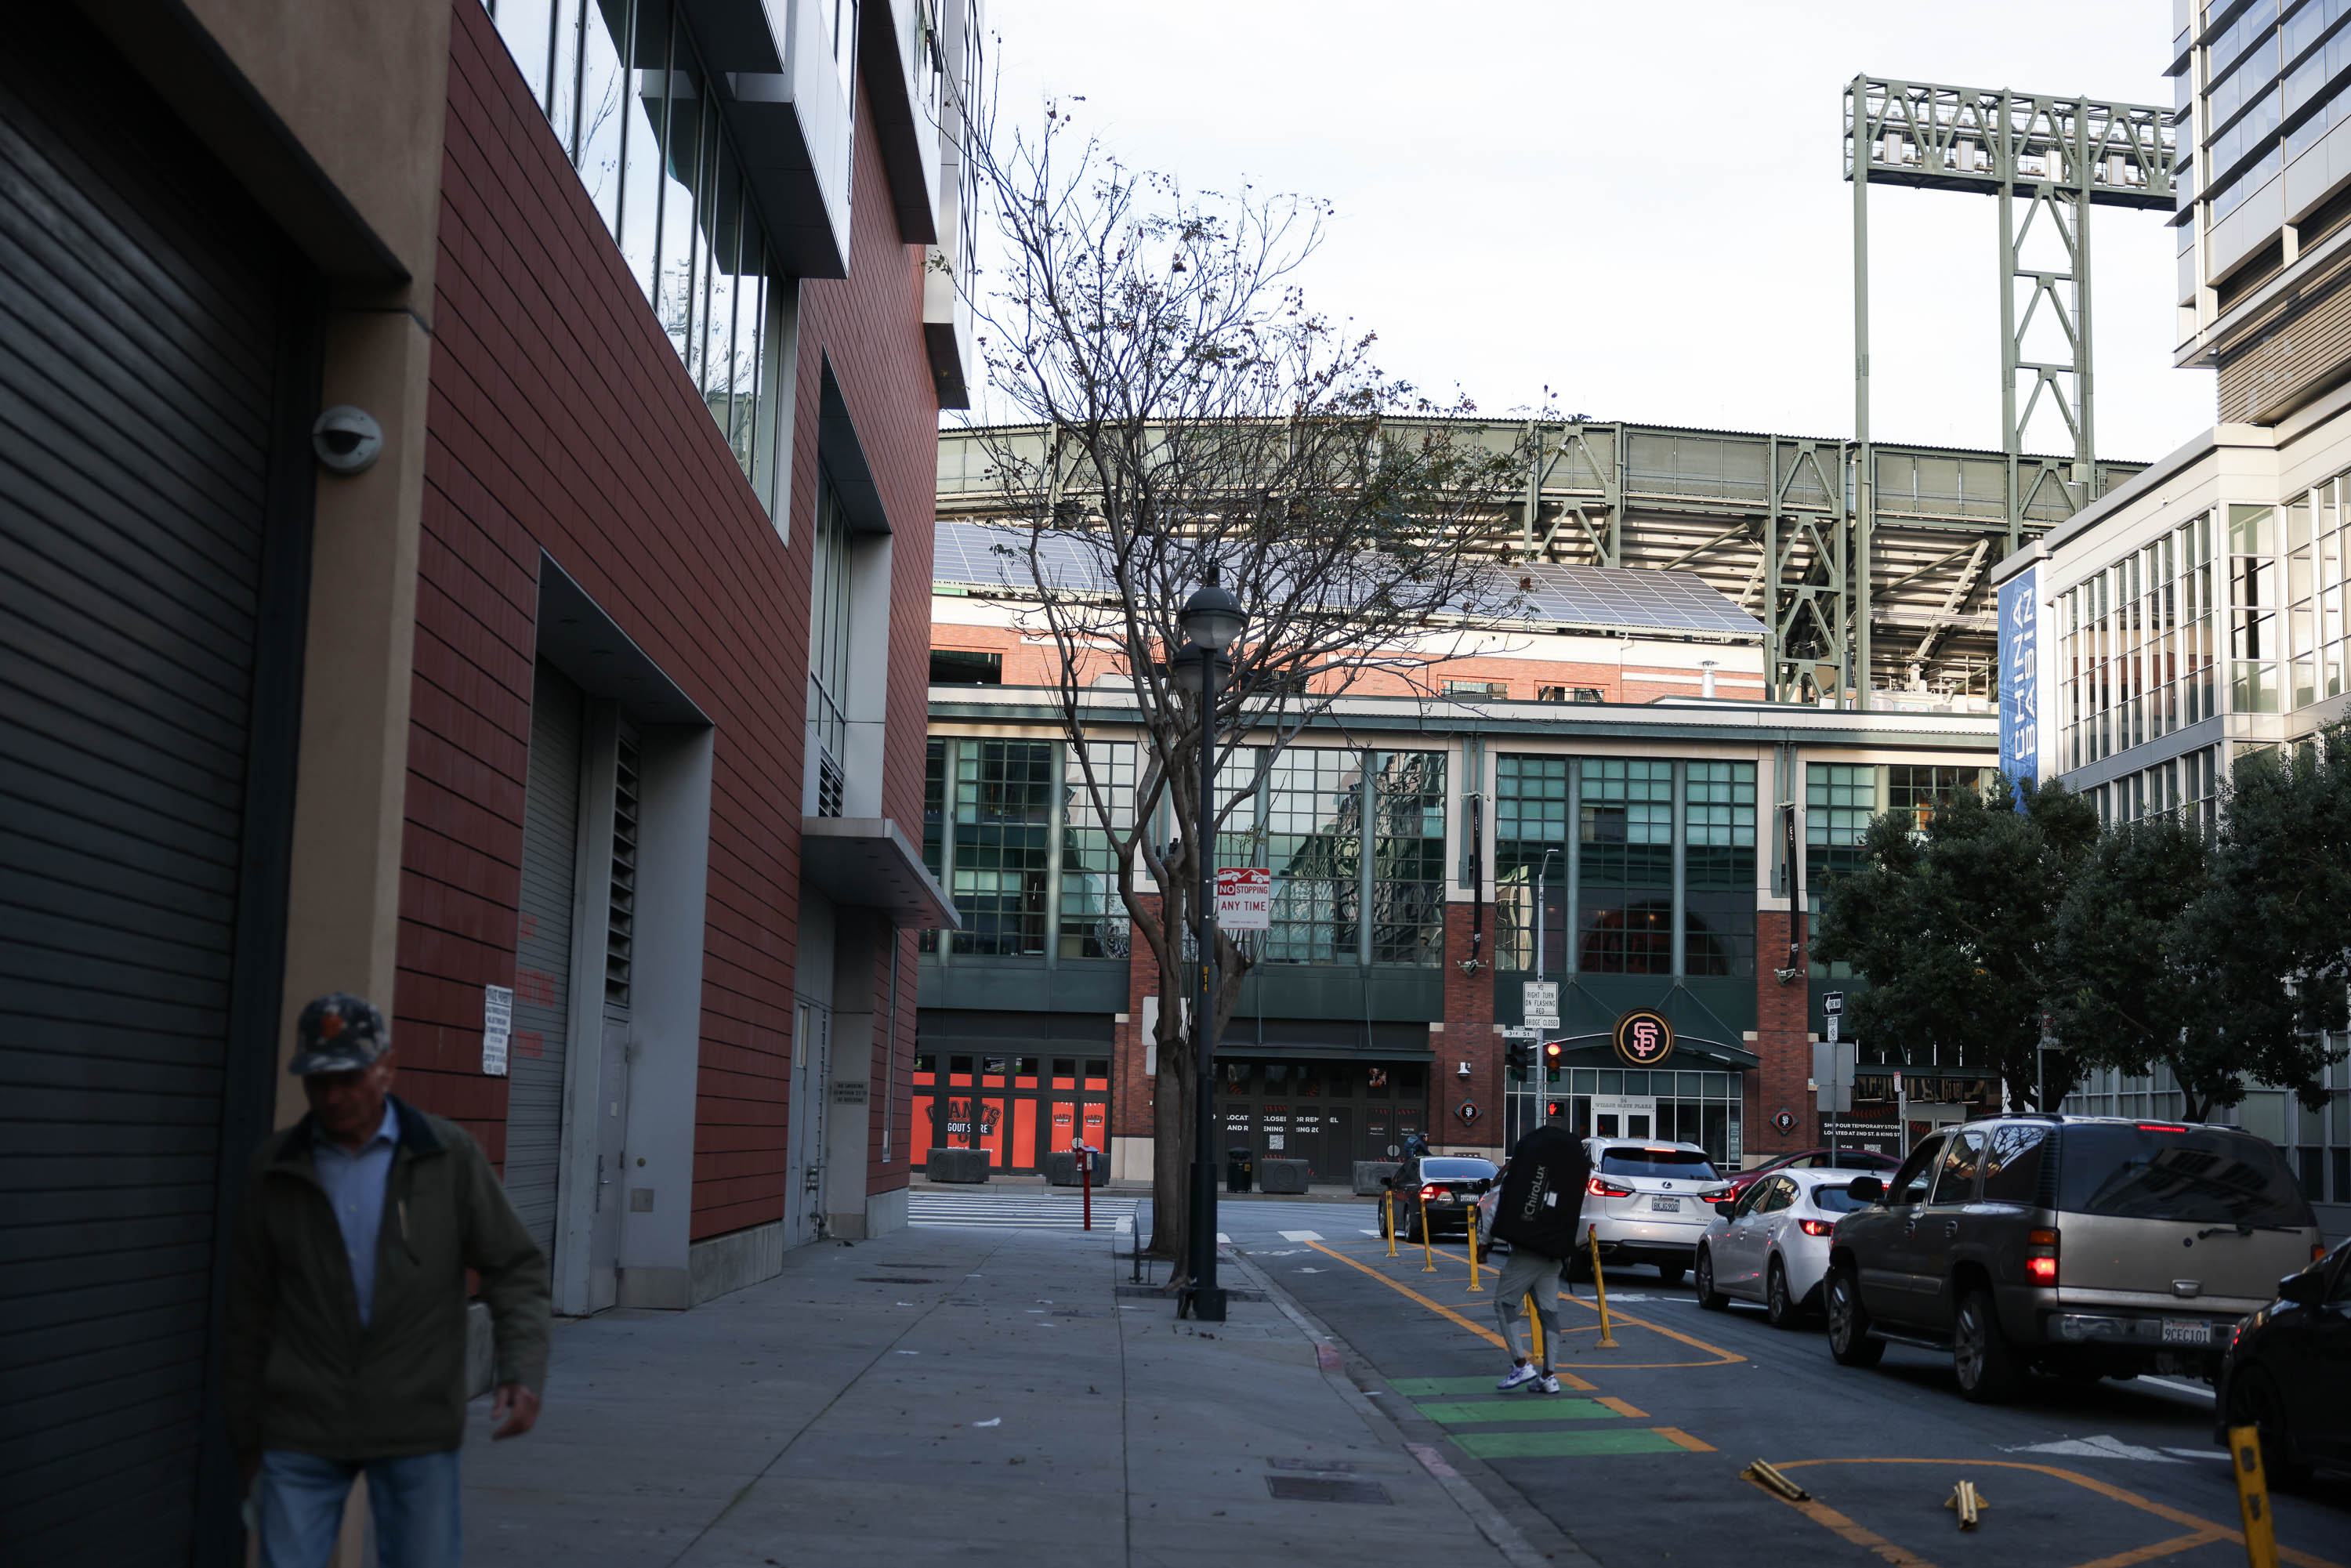 A street view with pedestrians, parked cars, and urban buildings leading to a stadium entrance.